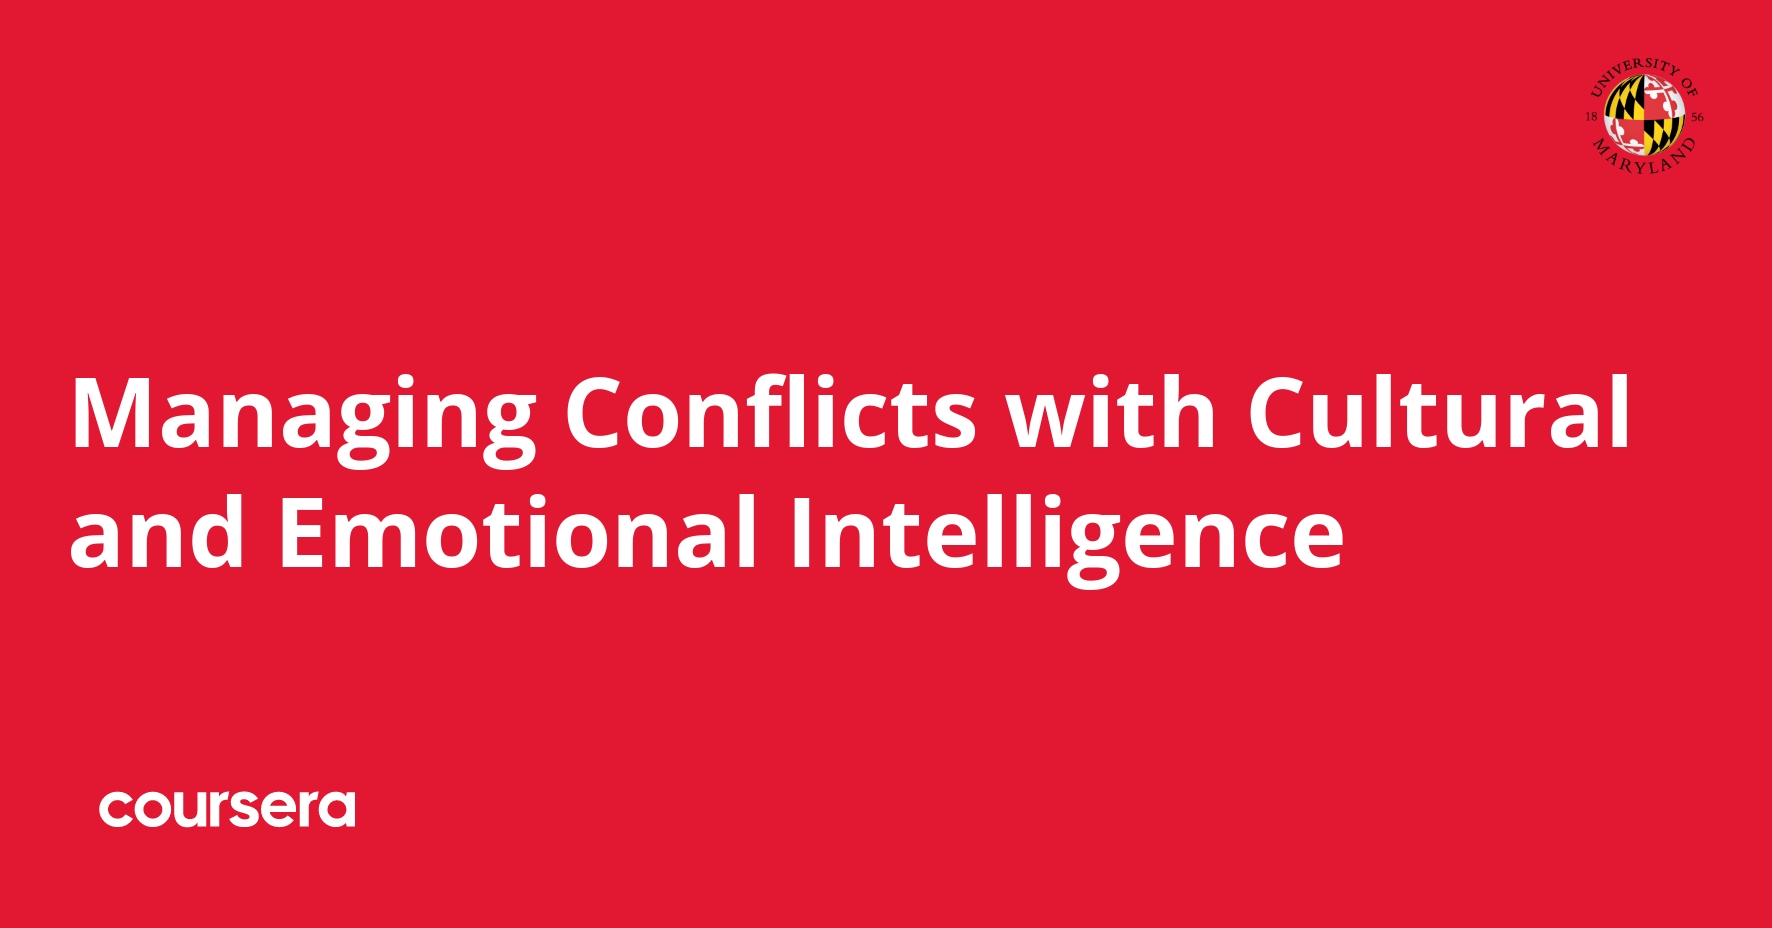 Managing Conflicts with Cultural and Emotional Intelligence